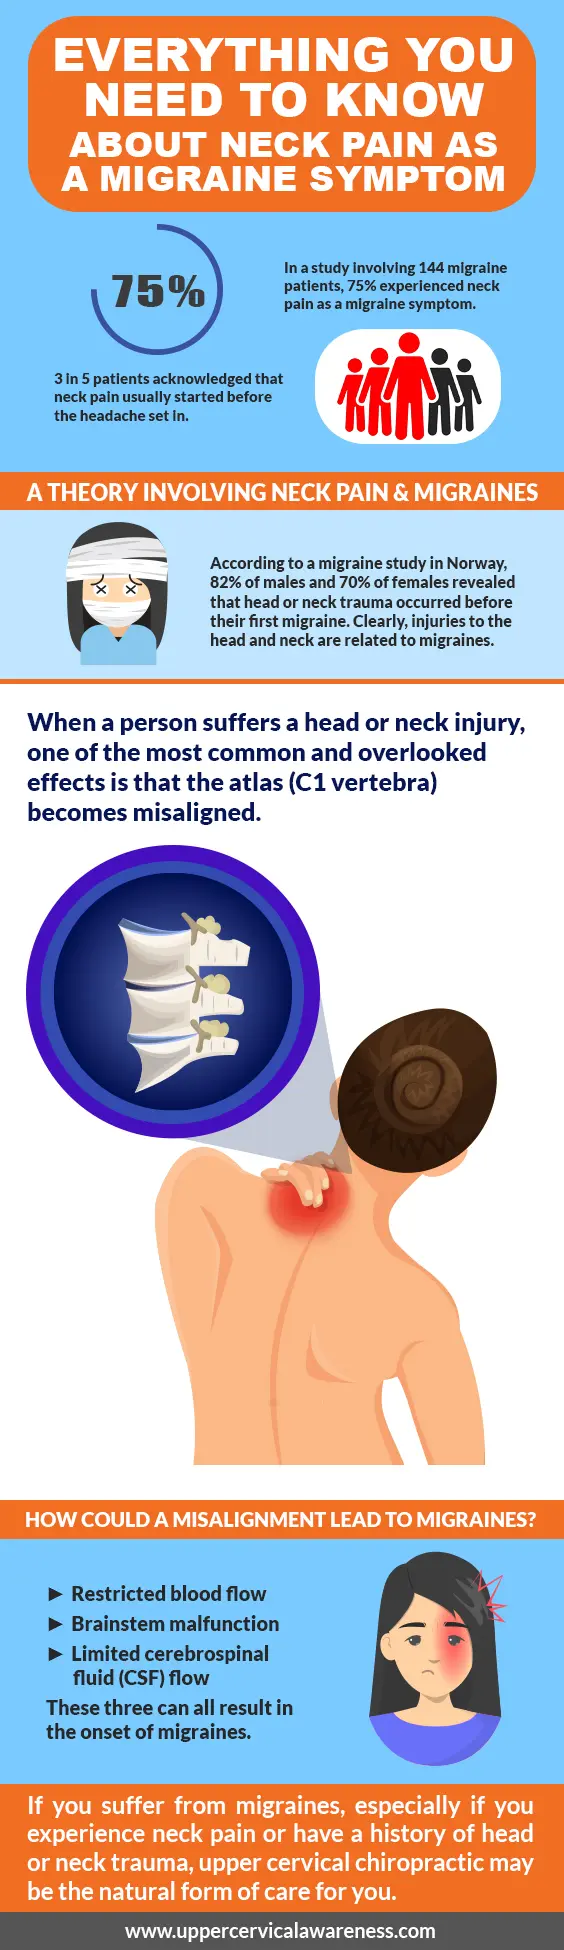 Everything You Need to Know About Neck Pain as a Migraine